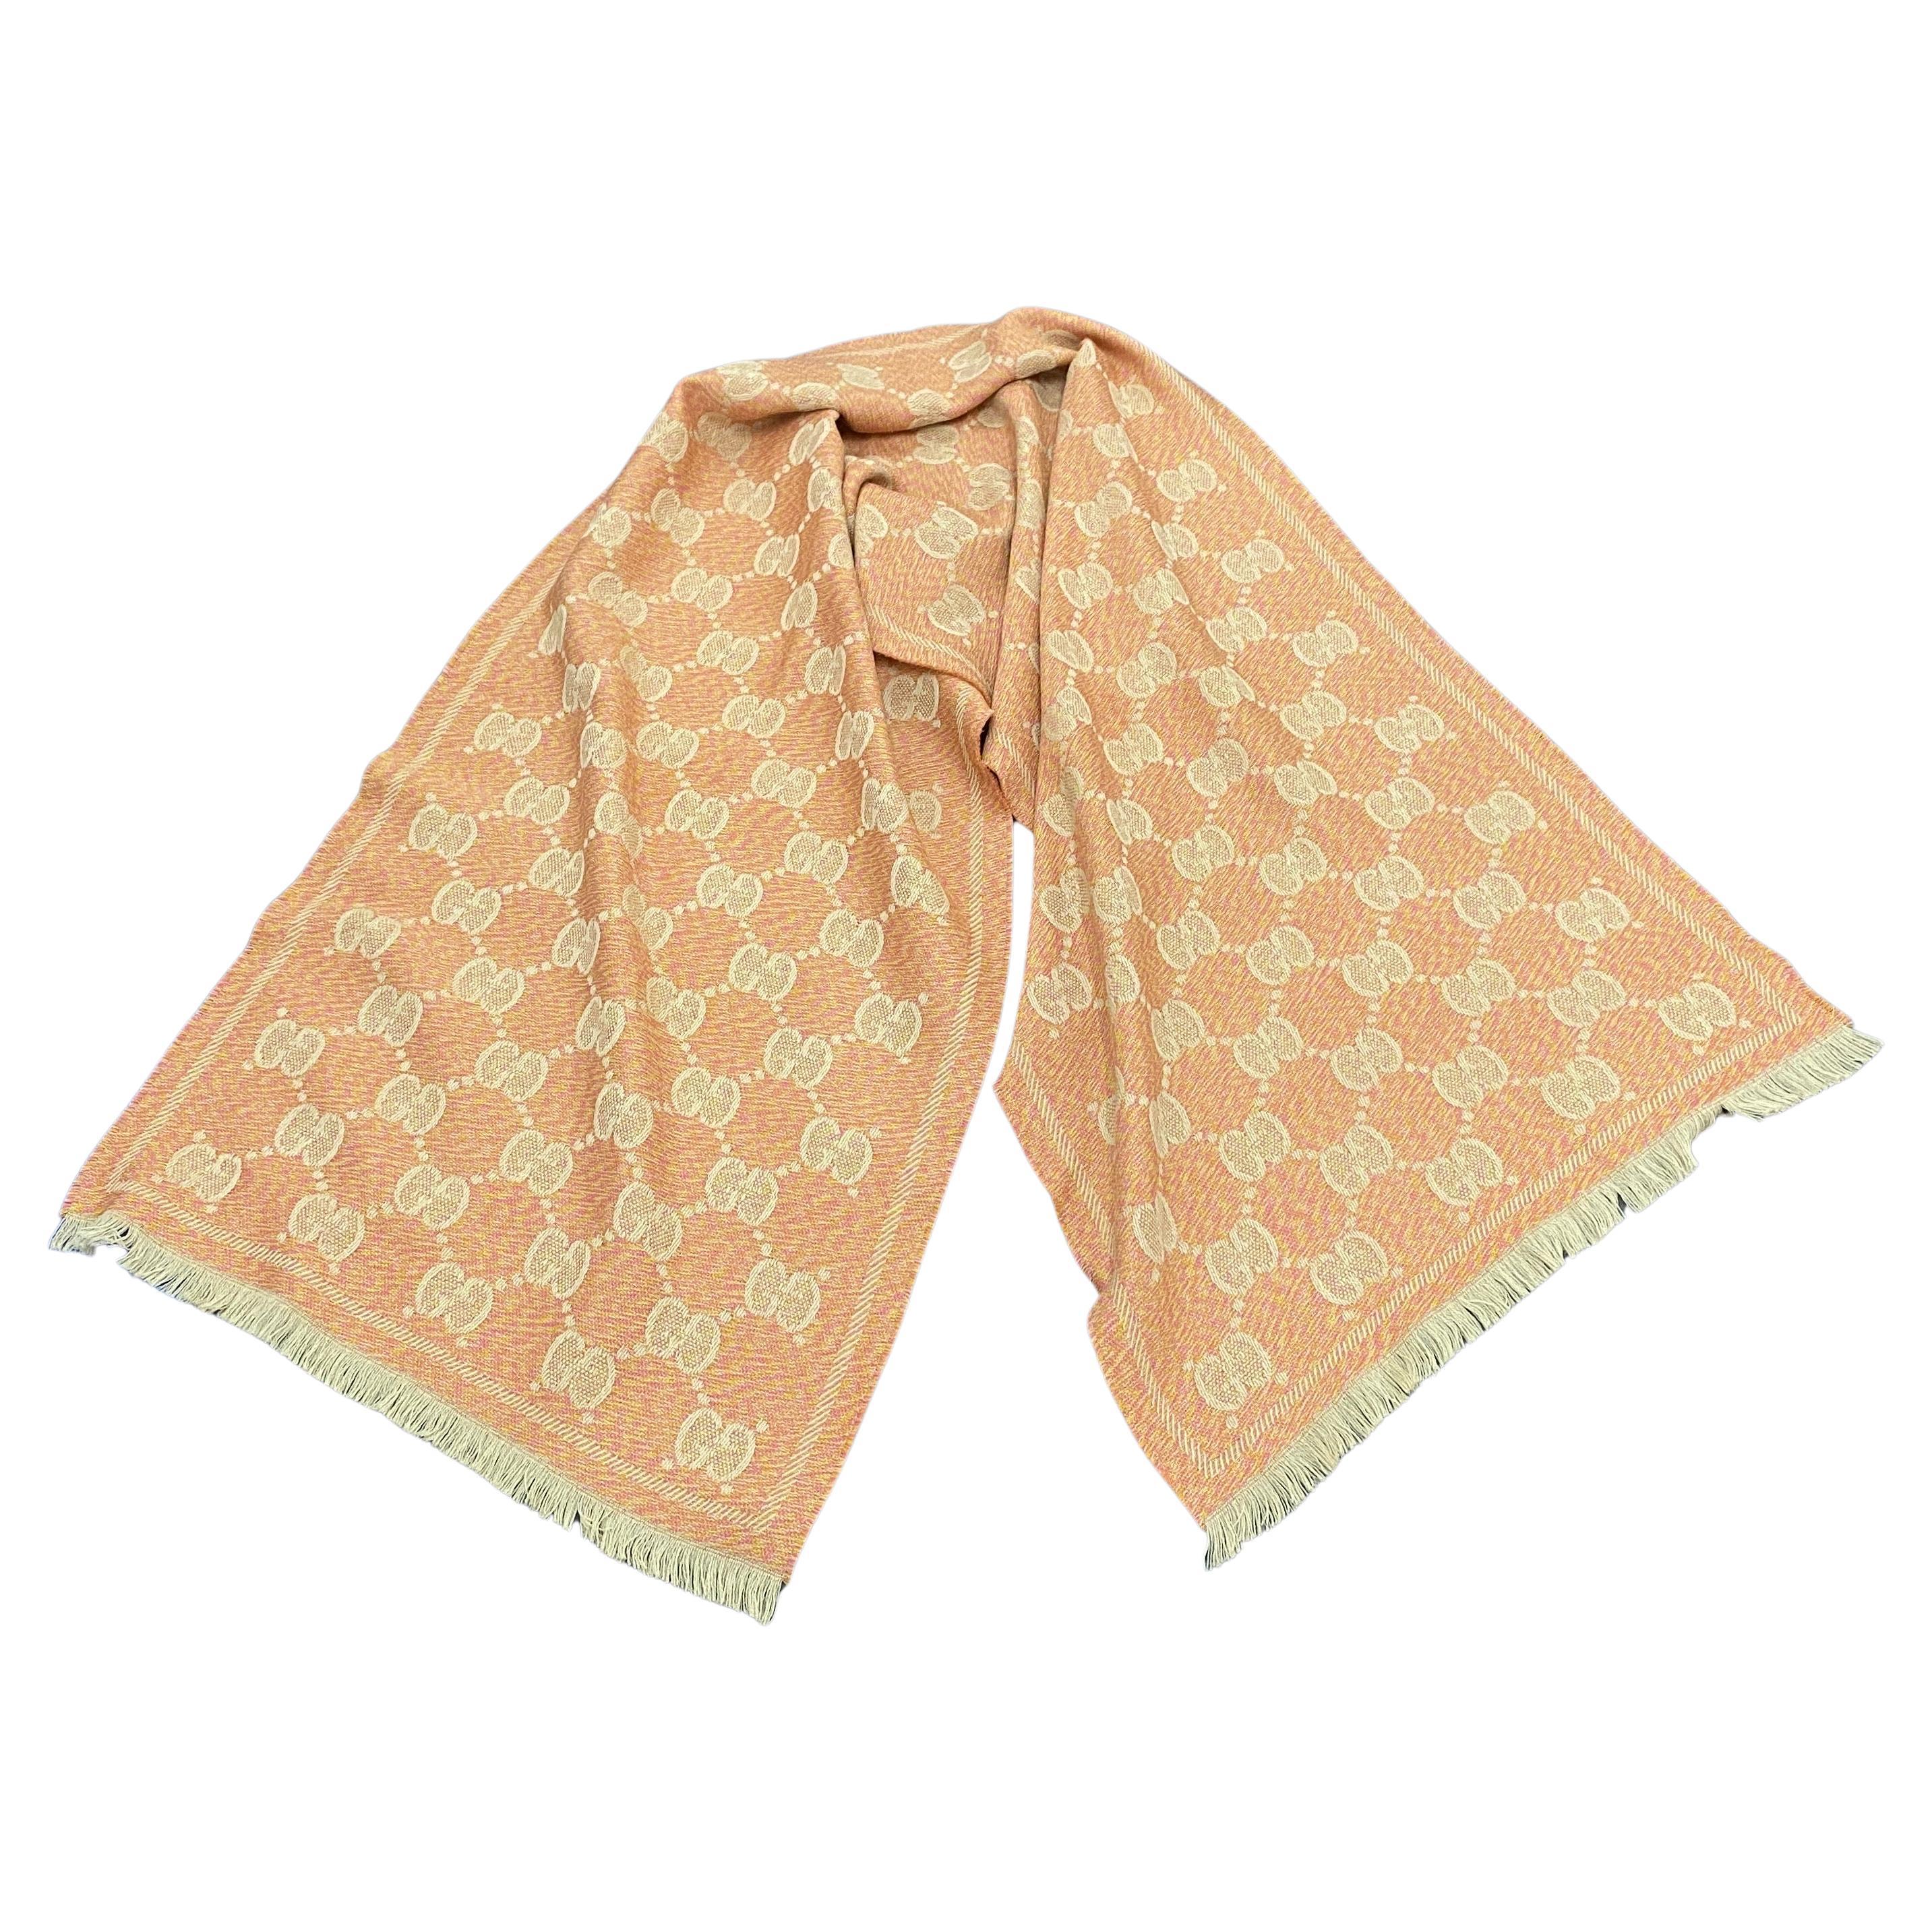 An Orange and Pink Continuous Logo Scarf designed and manufactured in Italy by Gucci, it'is a stylish accessory that combines the iconic Gucci logo with vibrant colors. Gucci is a well-known luxury fashion brand, and their scarves feature their